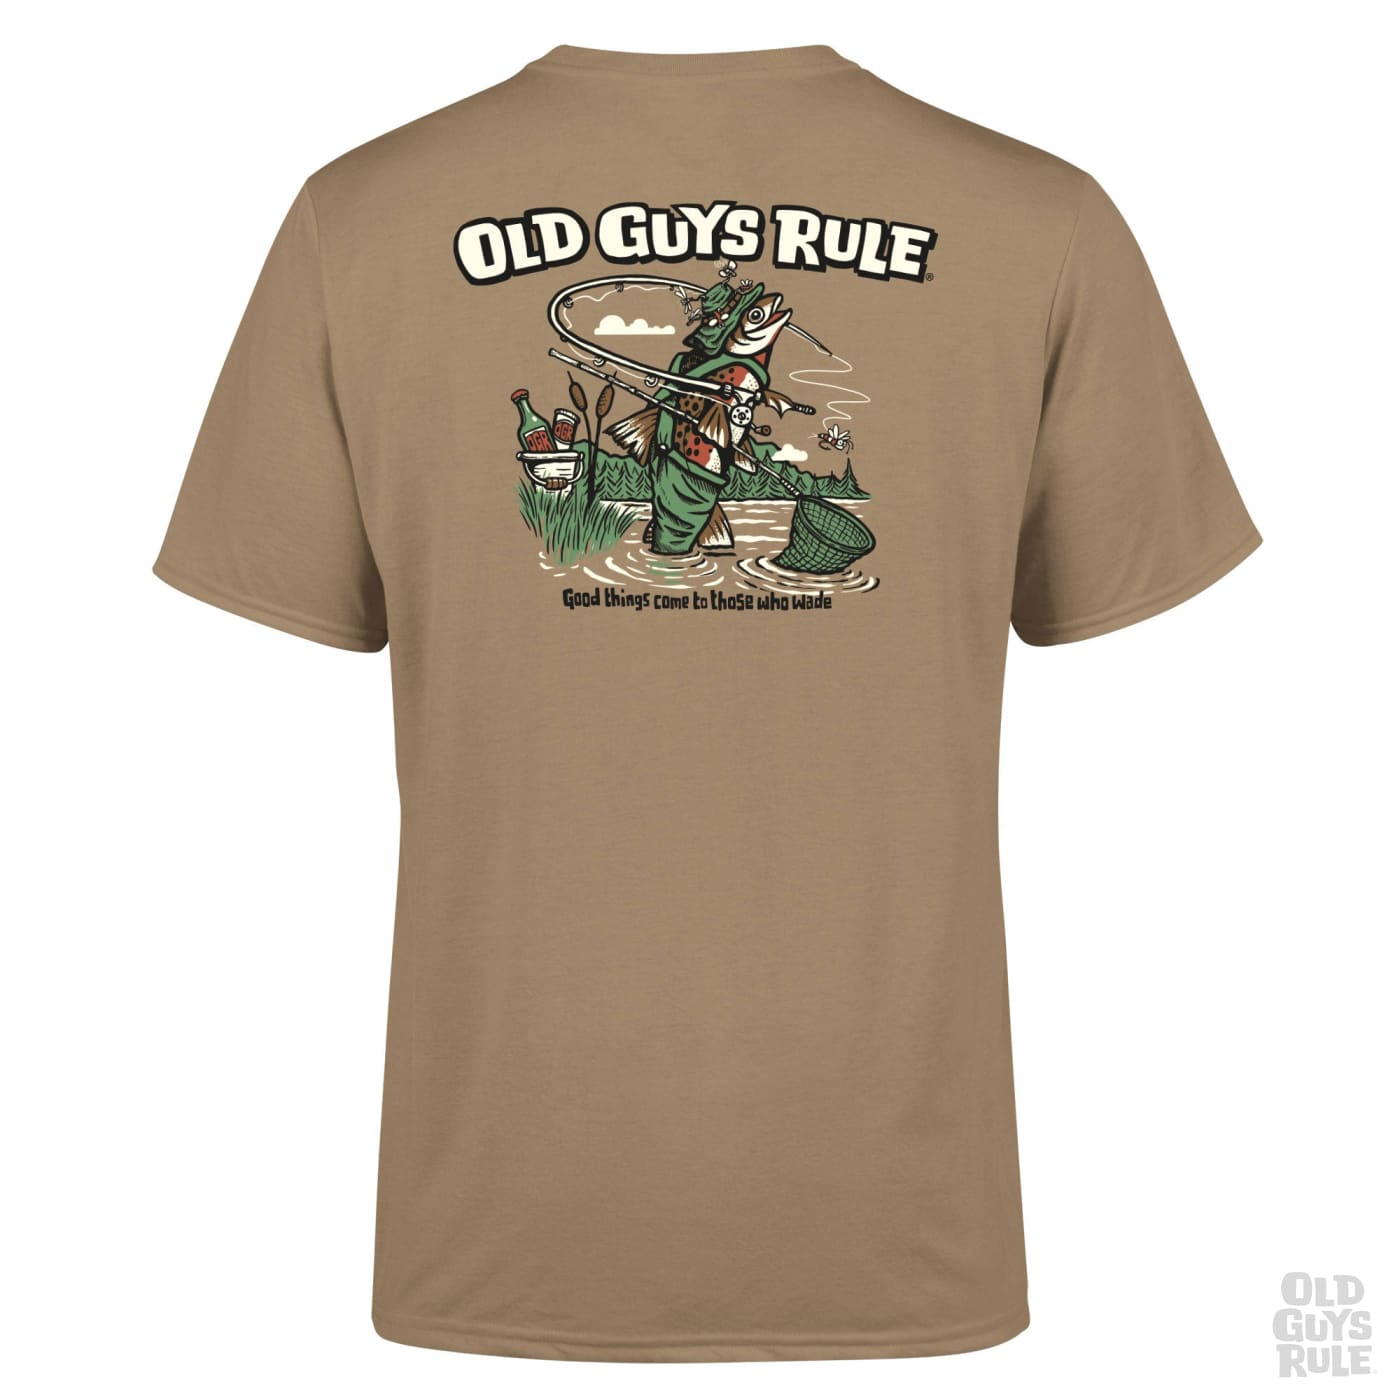 OLD GUYS RULE 'GOOD THINGS COME' T-SHIRT - TAN